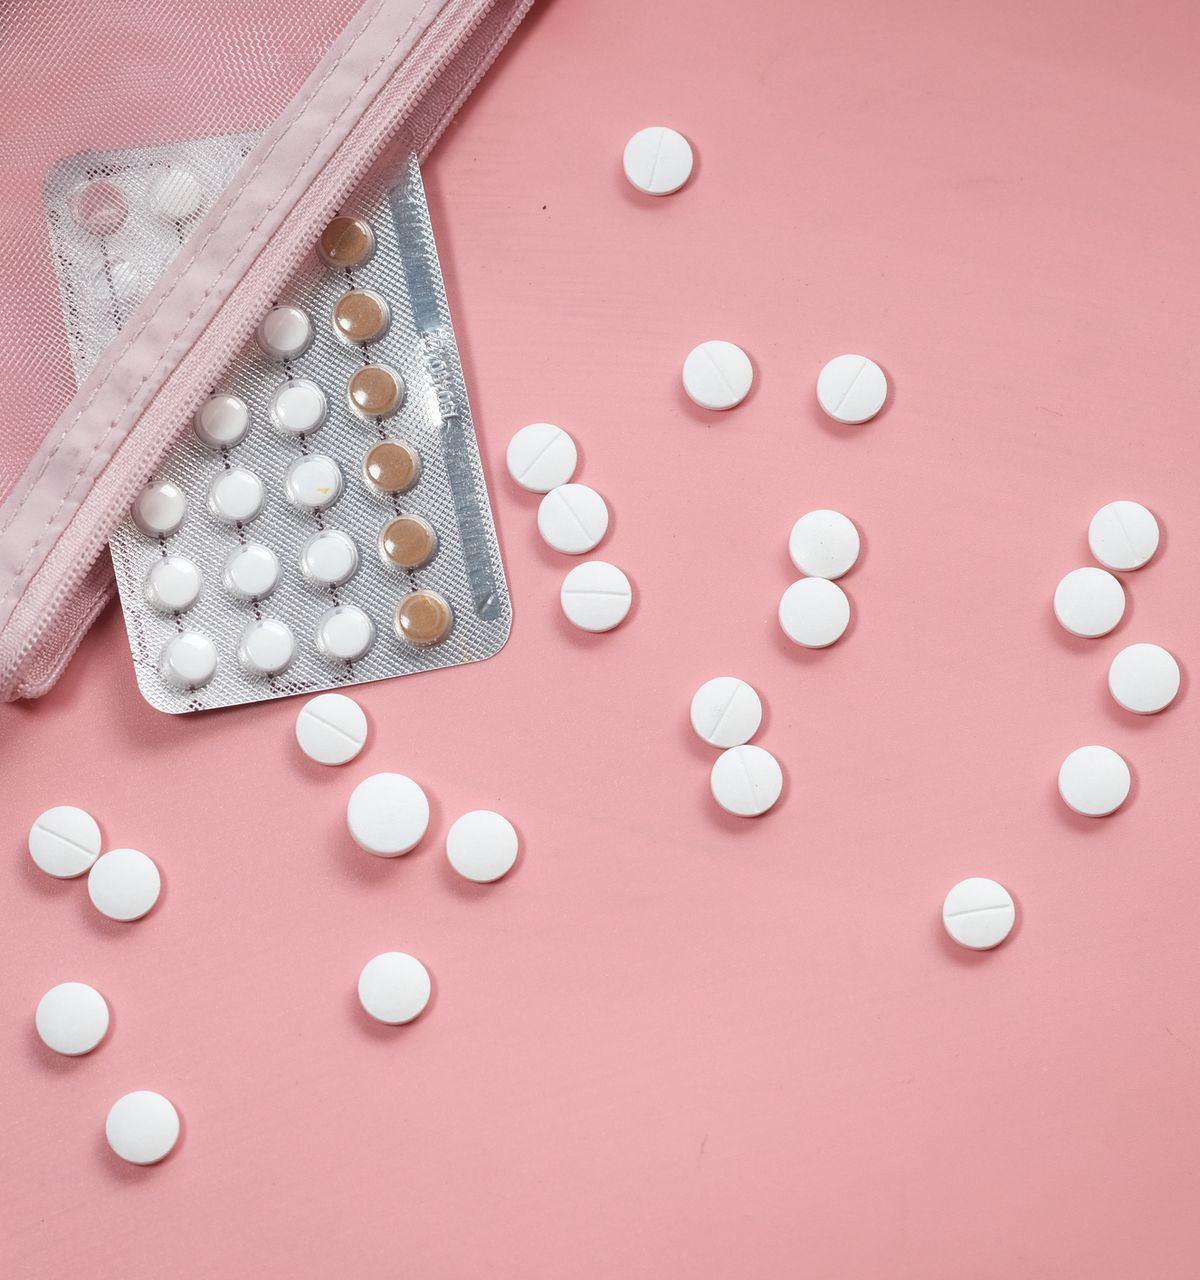 Here's How To Prevent Acne After Stopping Birth Control Pills